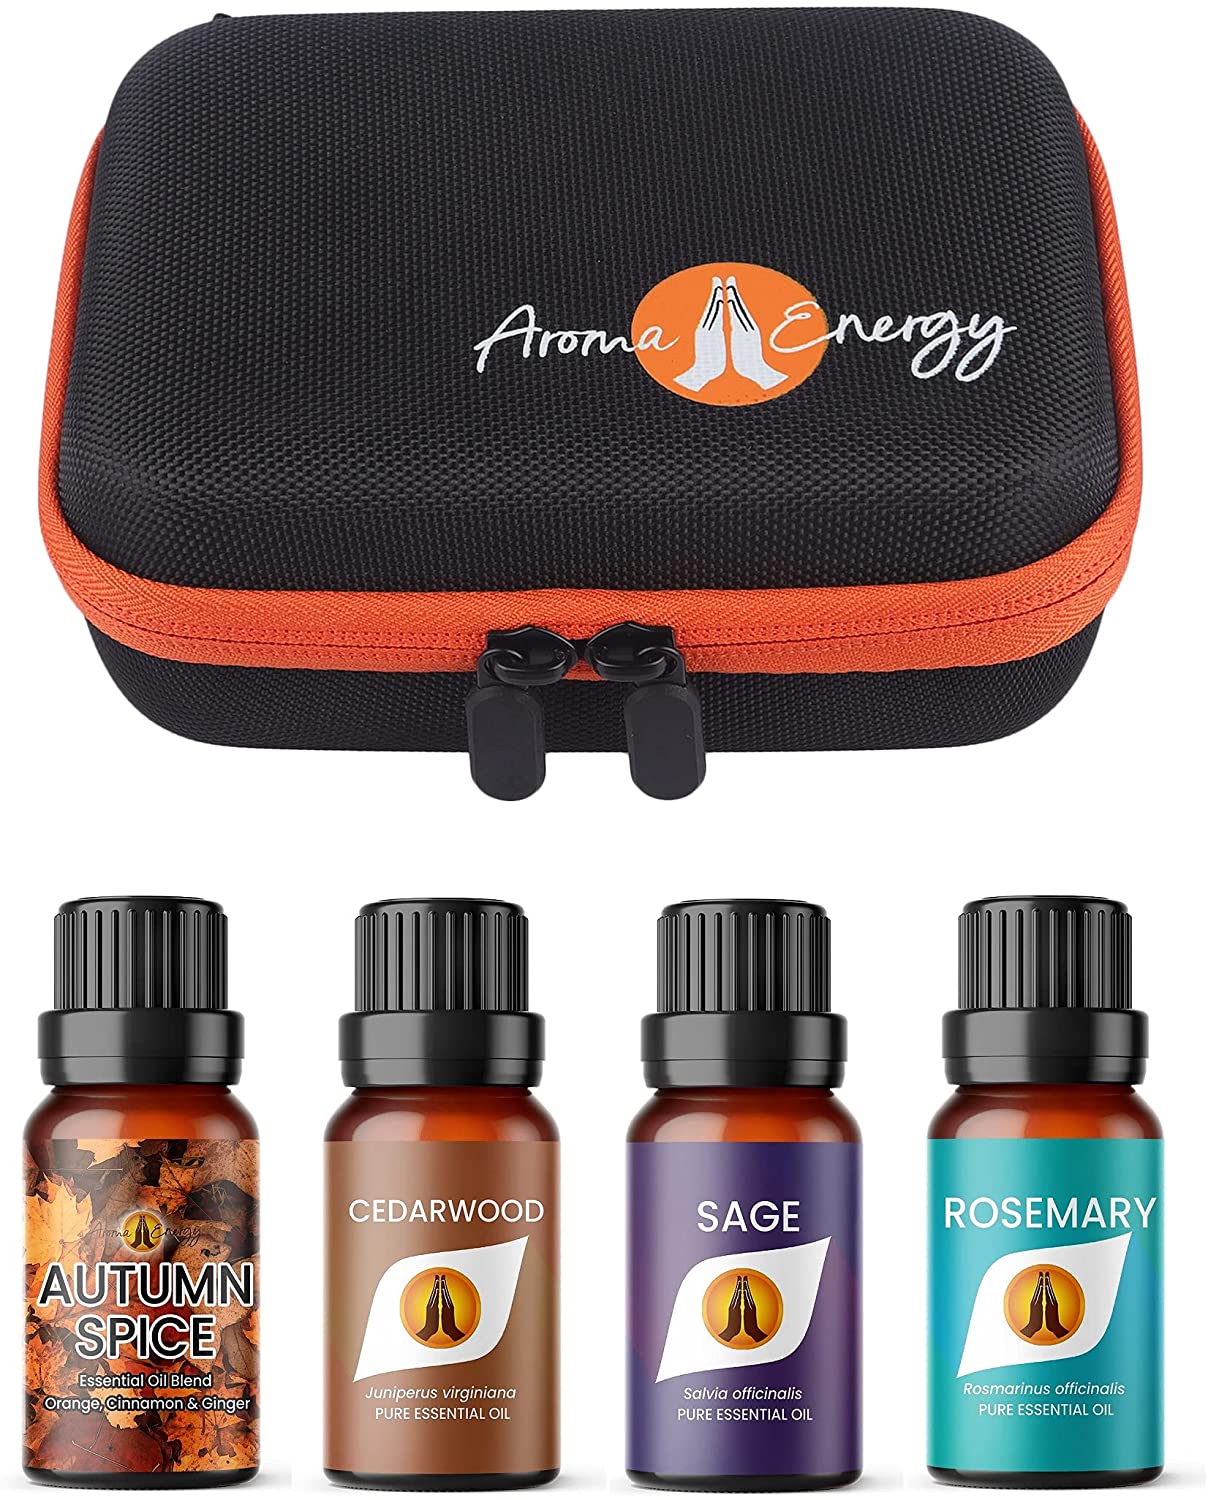 Essential Oil Gift Set Travel Case with pack of 4 x 10ml oils Autumn Essential Oils - Autumn Spice, Cedarwood, Sage, Rosemary - Aroma Energy